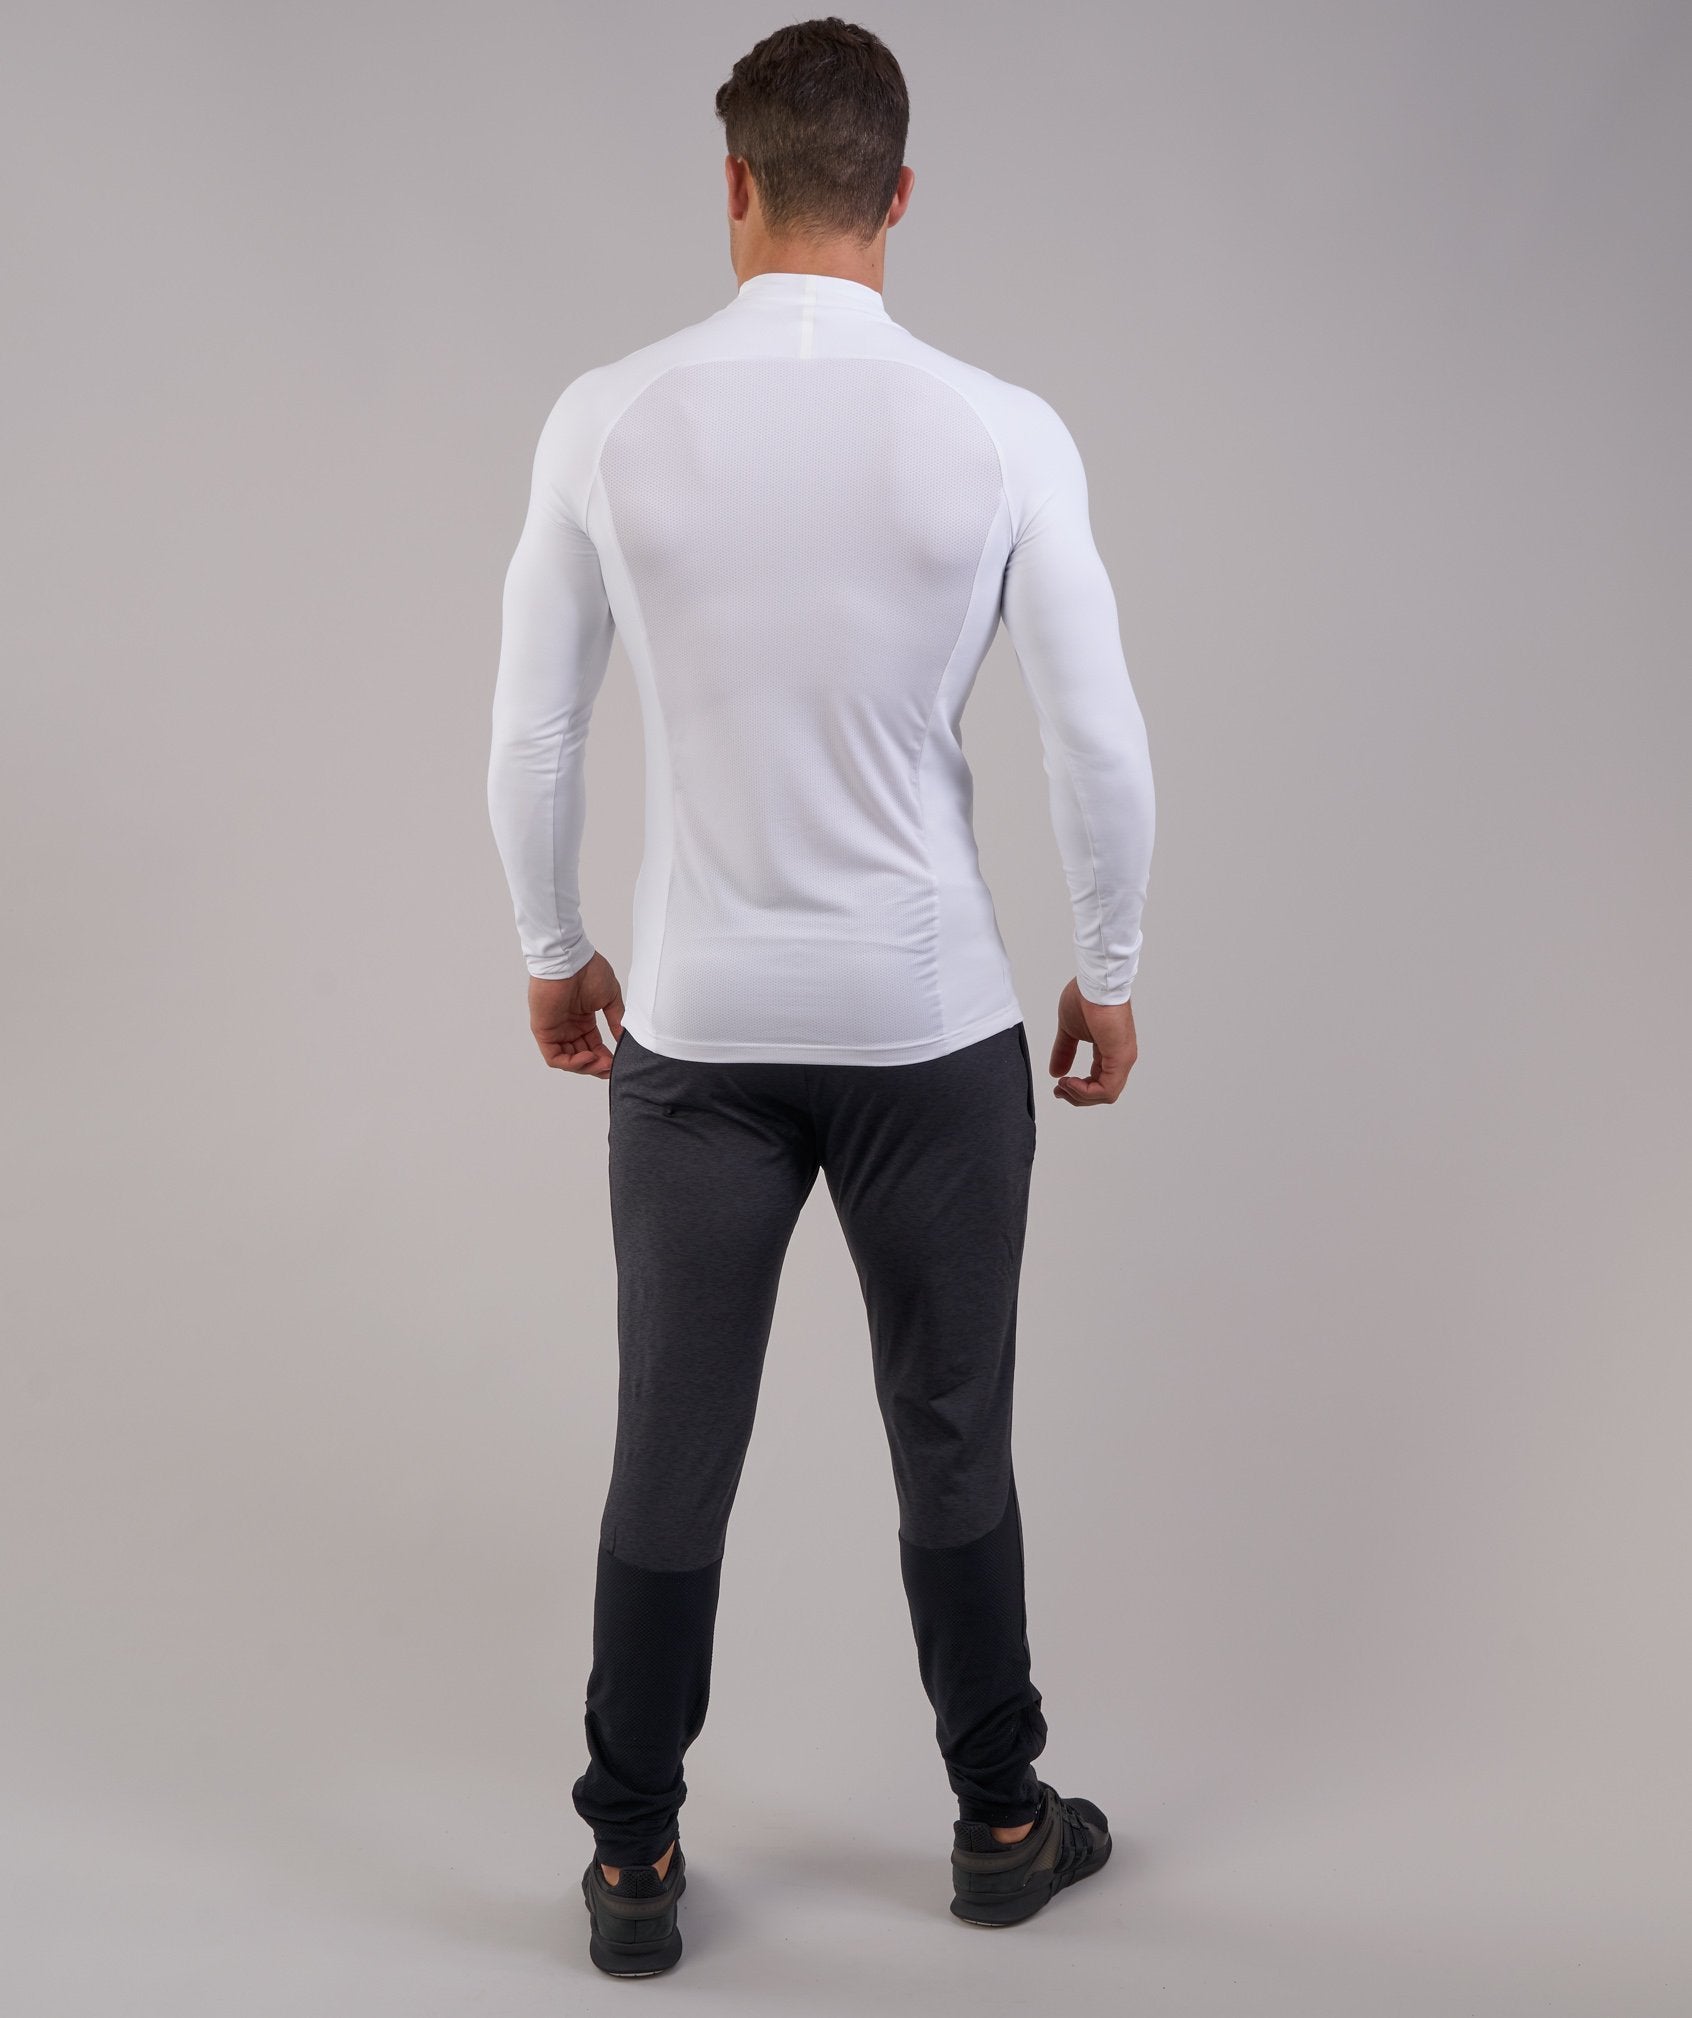 Edge 1/4 Zip Pullover in White - view 3